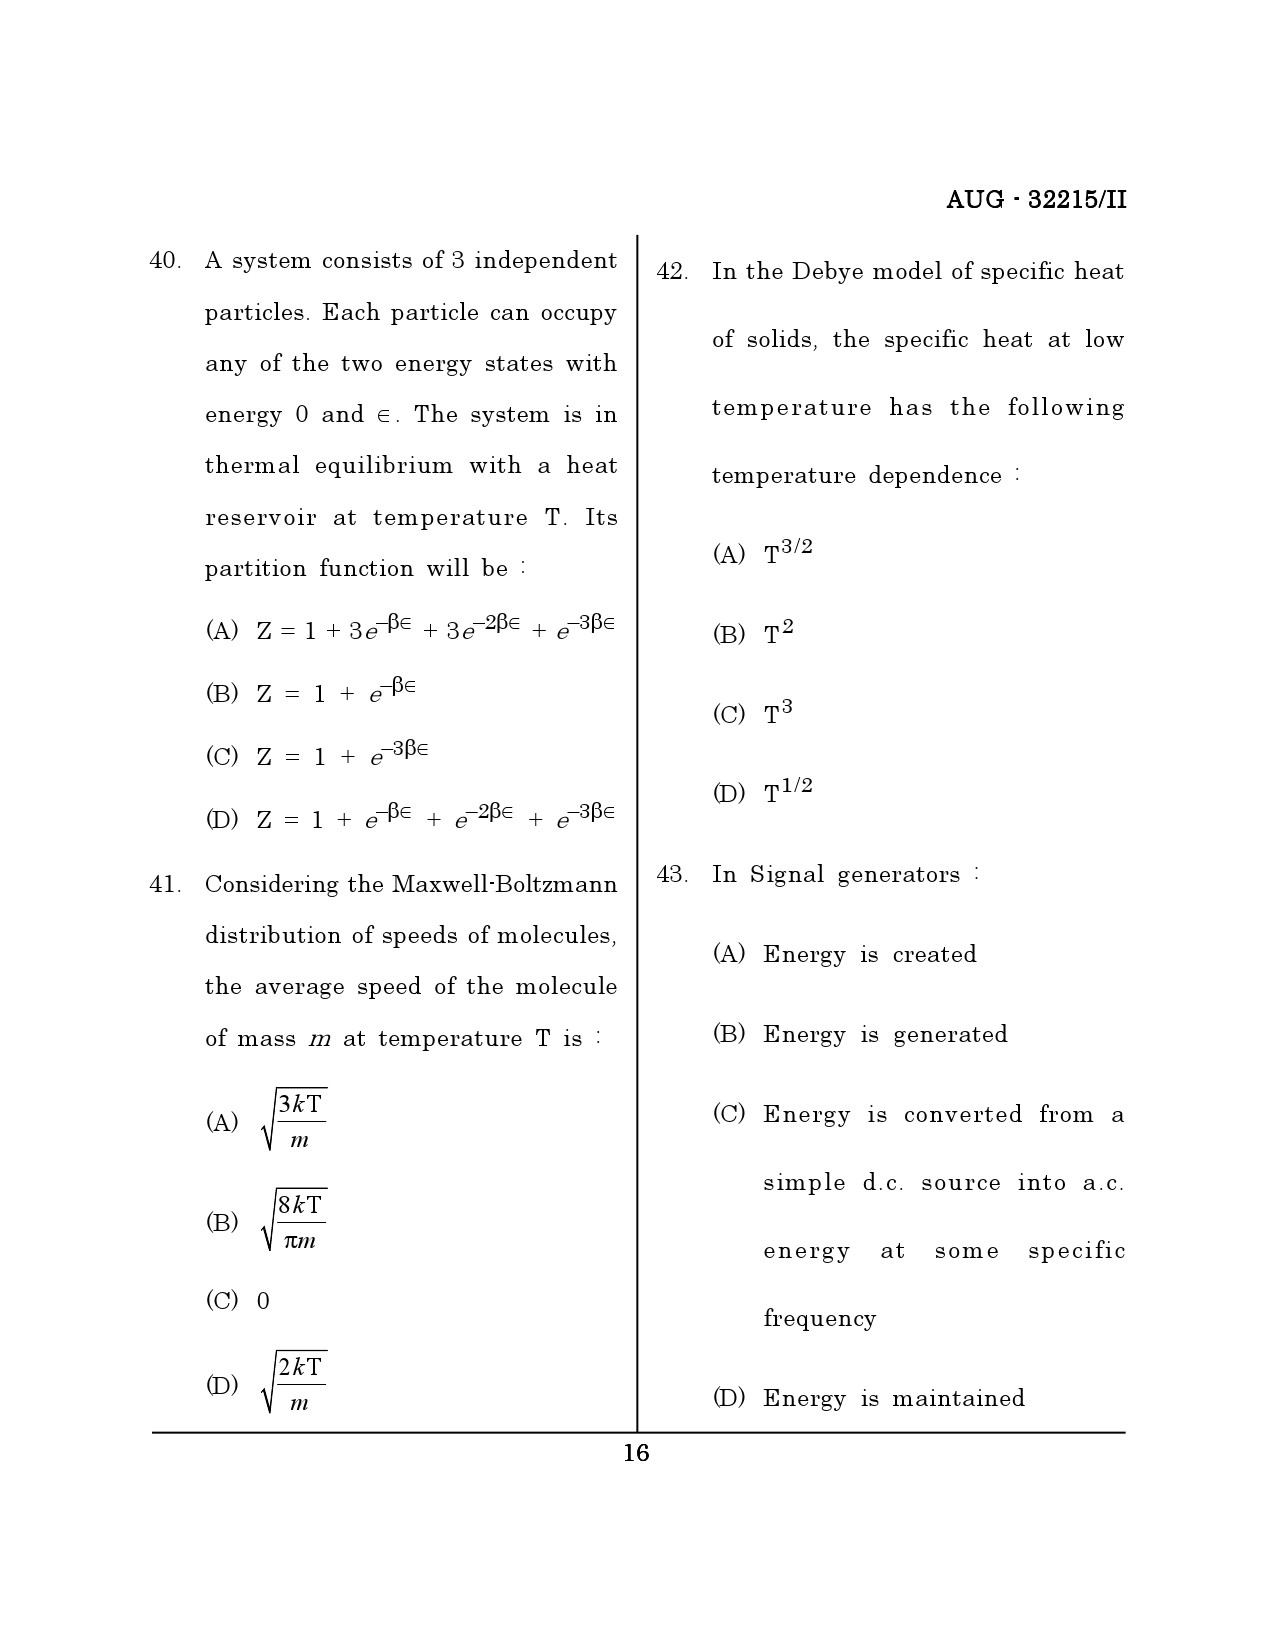 Maharashtra SET Physical Science Question Paper II August 2015 15